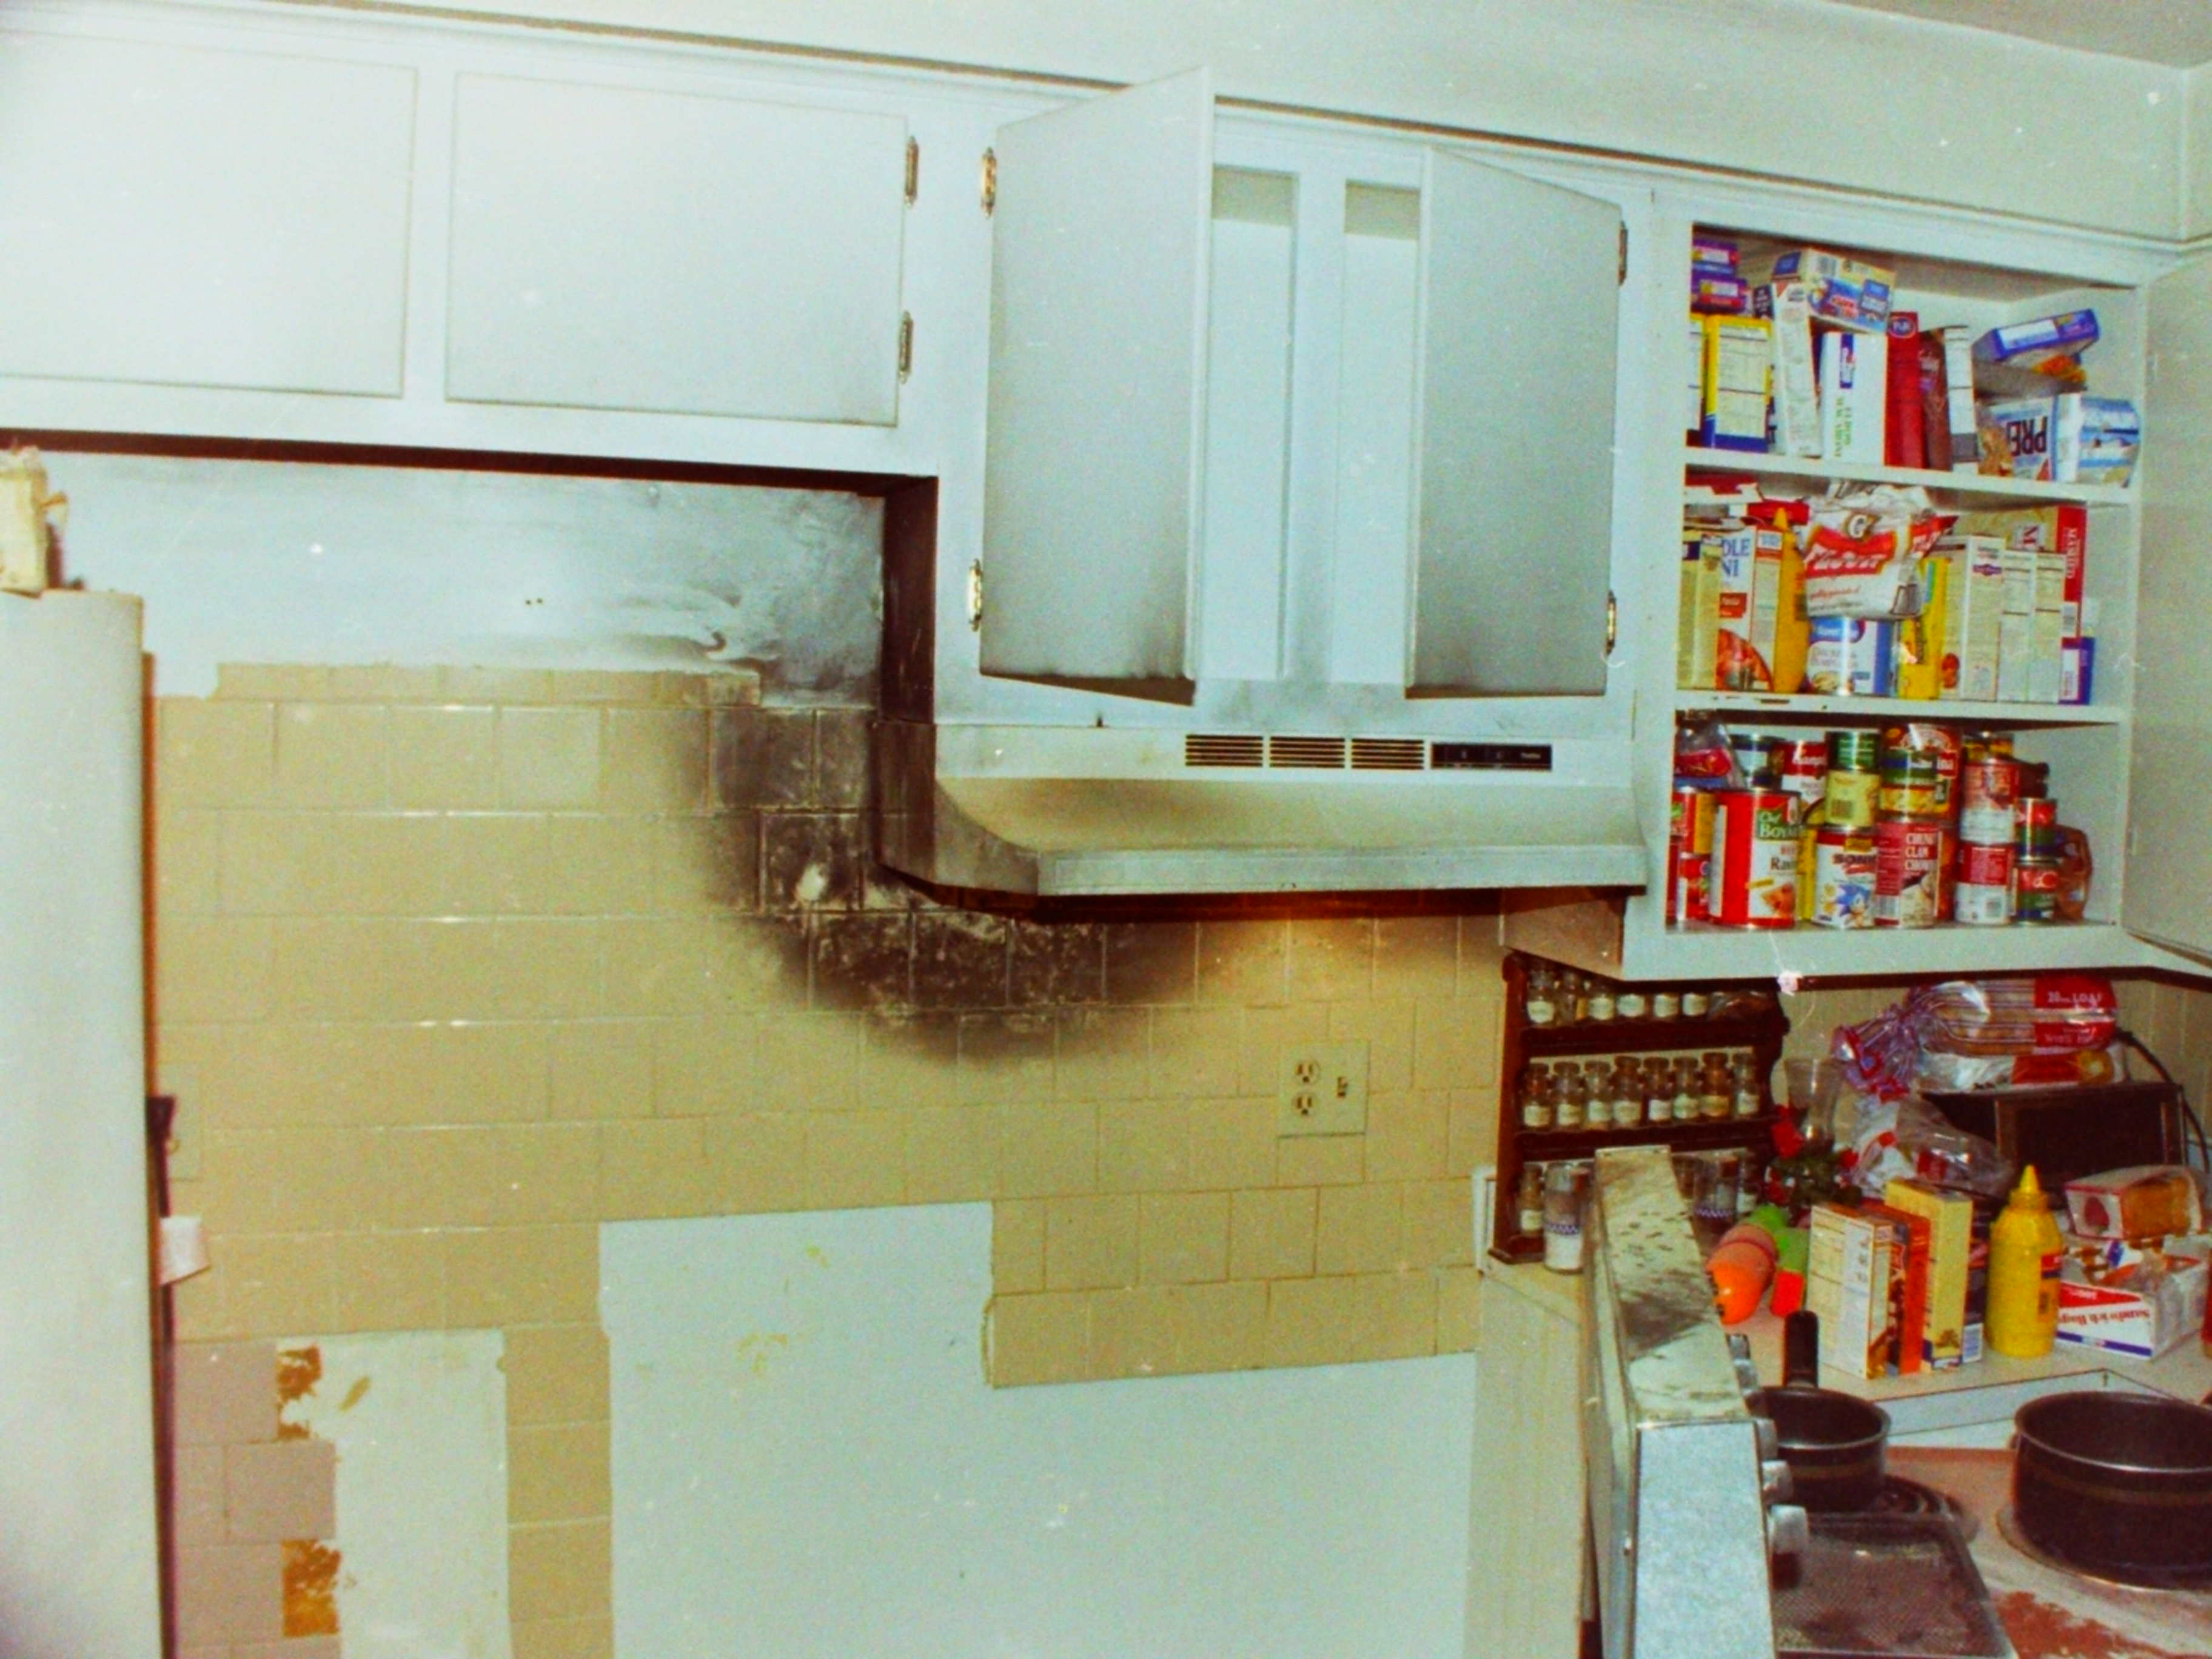 03-07-96  Response  - Bathhouse Fire Highland Park, Kitchen Fire 101 Hooper, 75th Painting